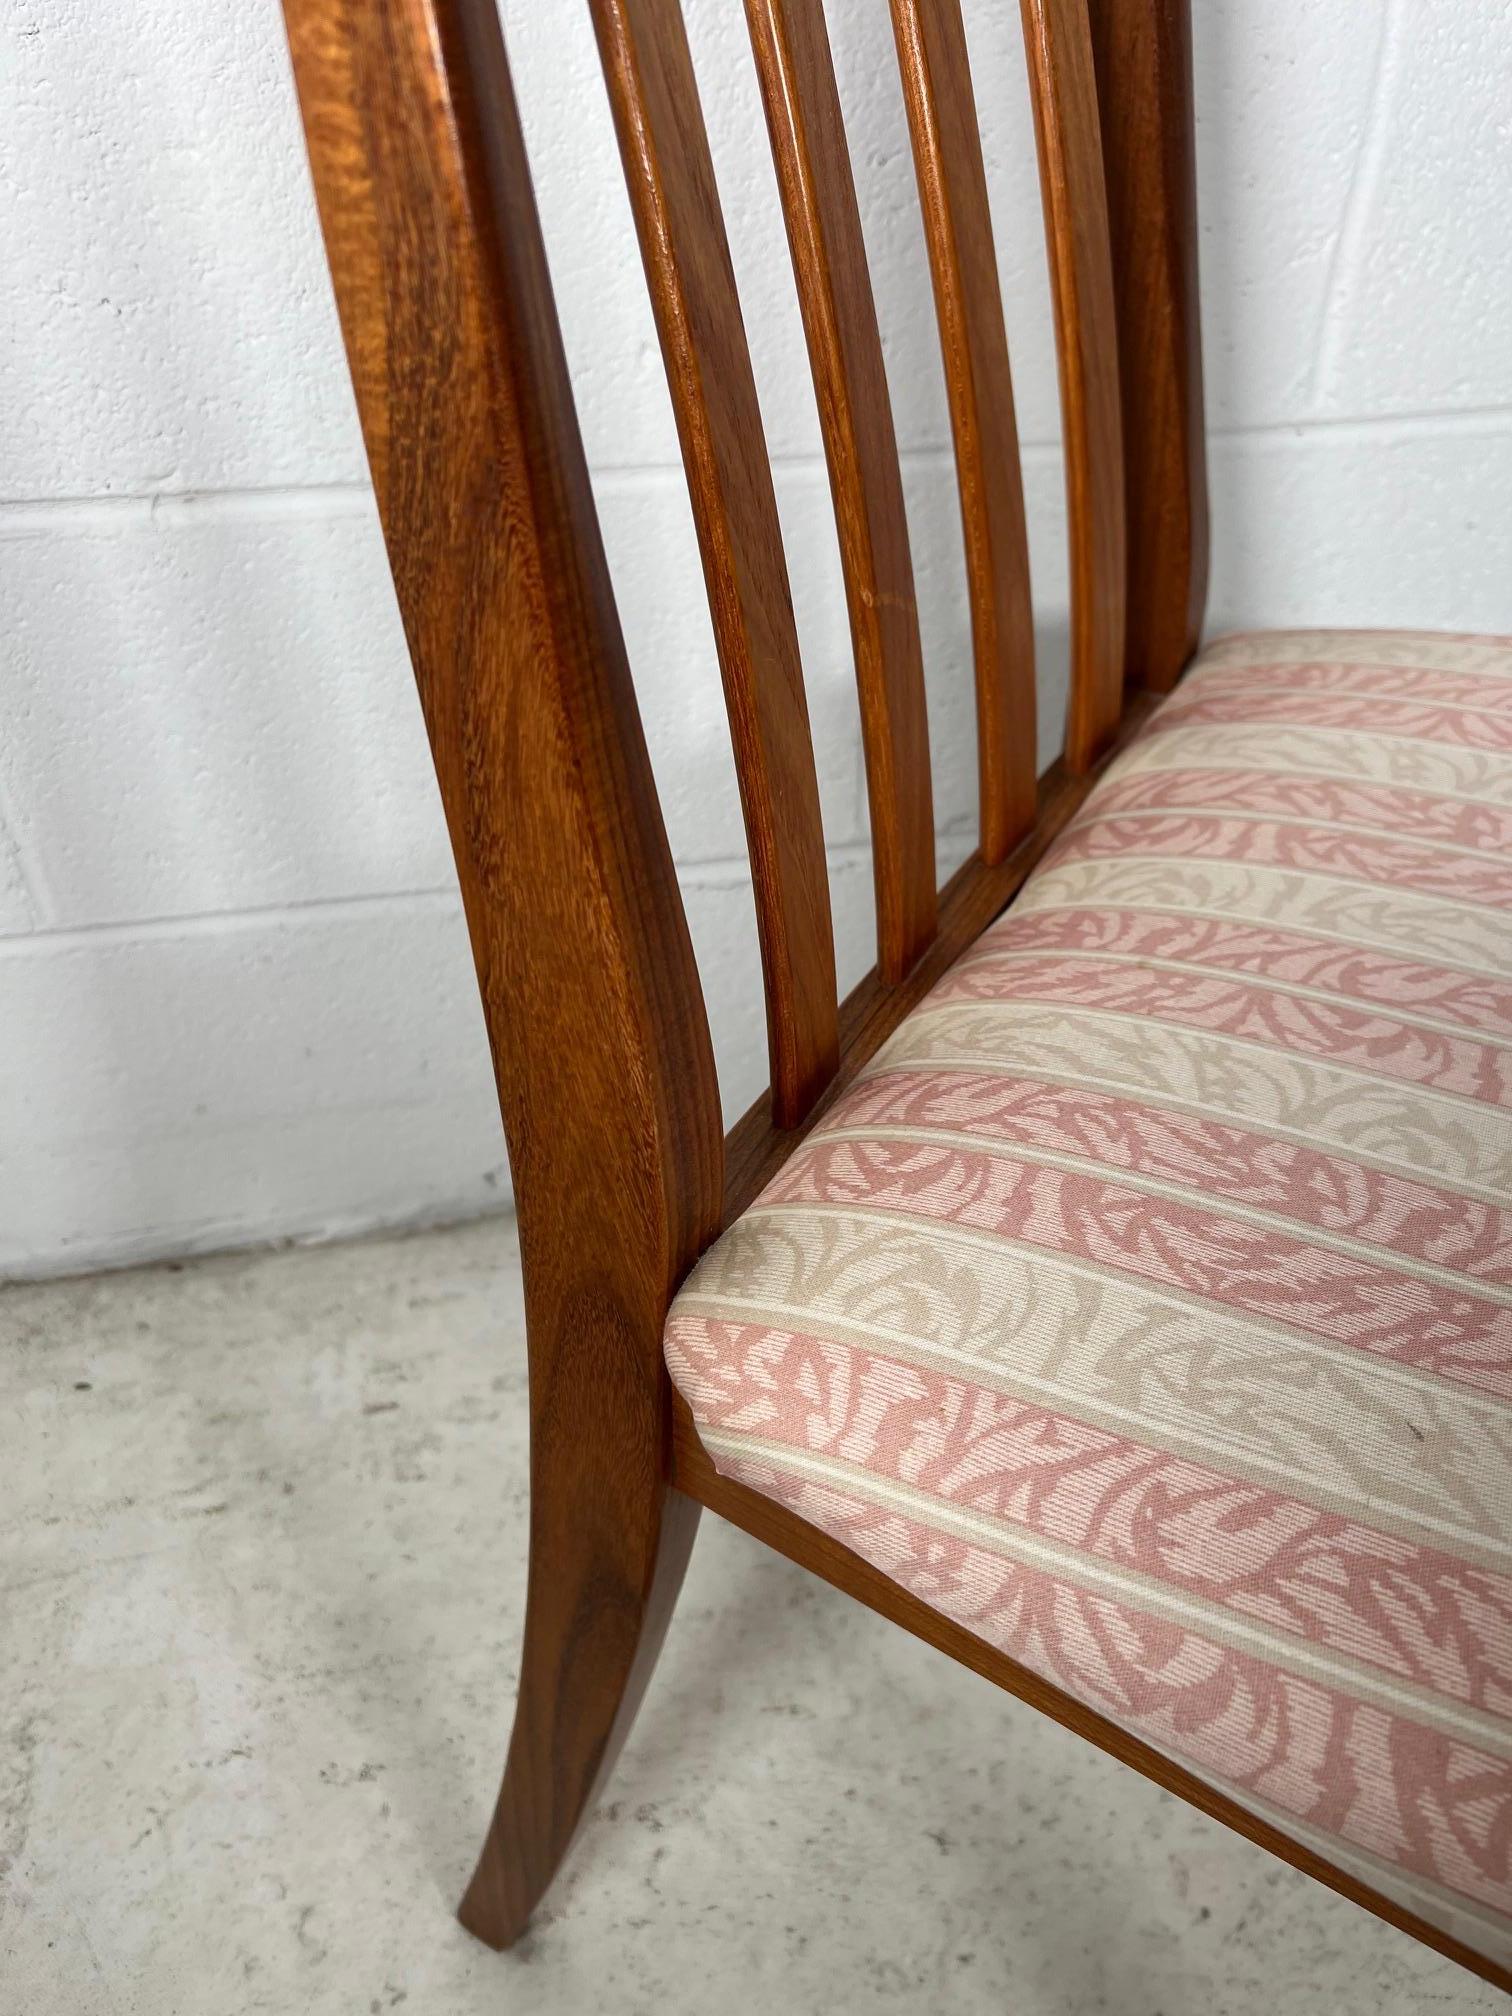 Set Of 6 Mid Century Modern Teak Chairs By G Plan Slat Back  2 With Arms 4